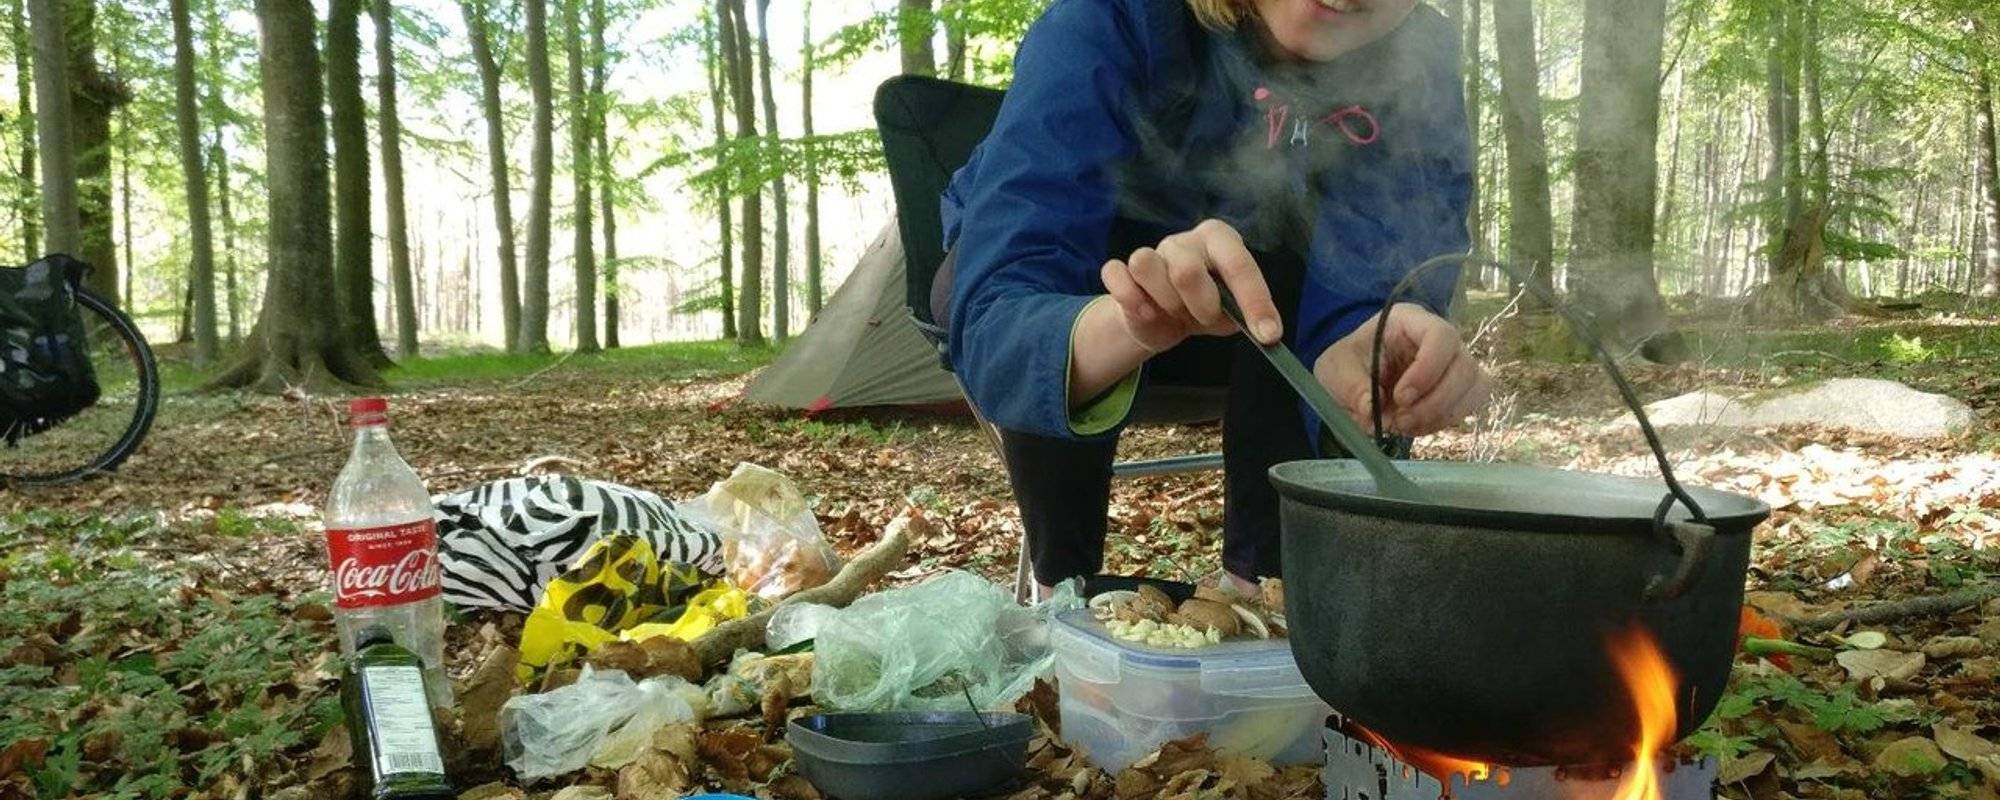 Cycle adventure across Europe: Cooking in nature is awesome. 